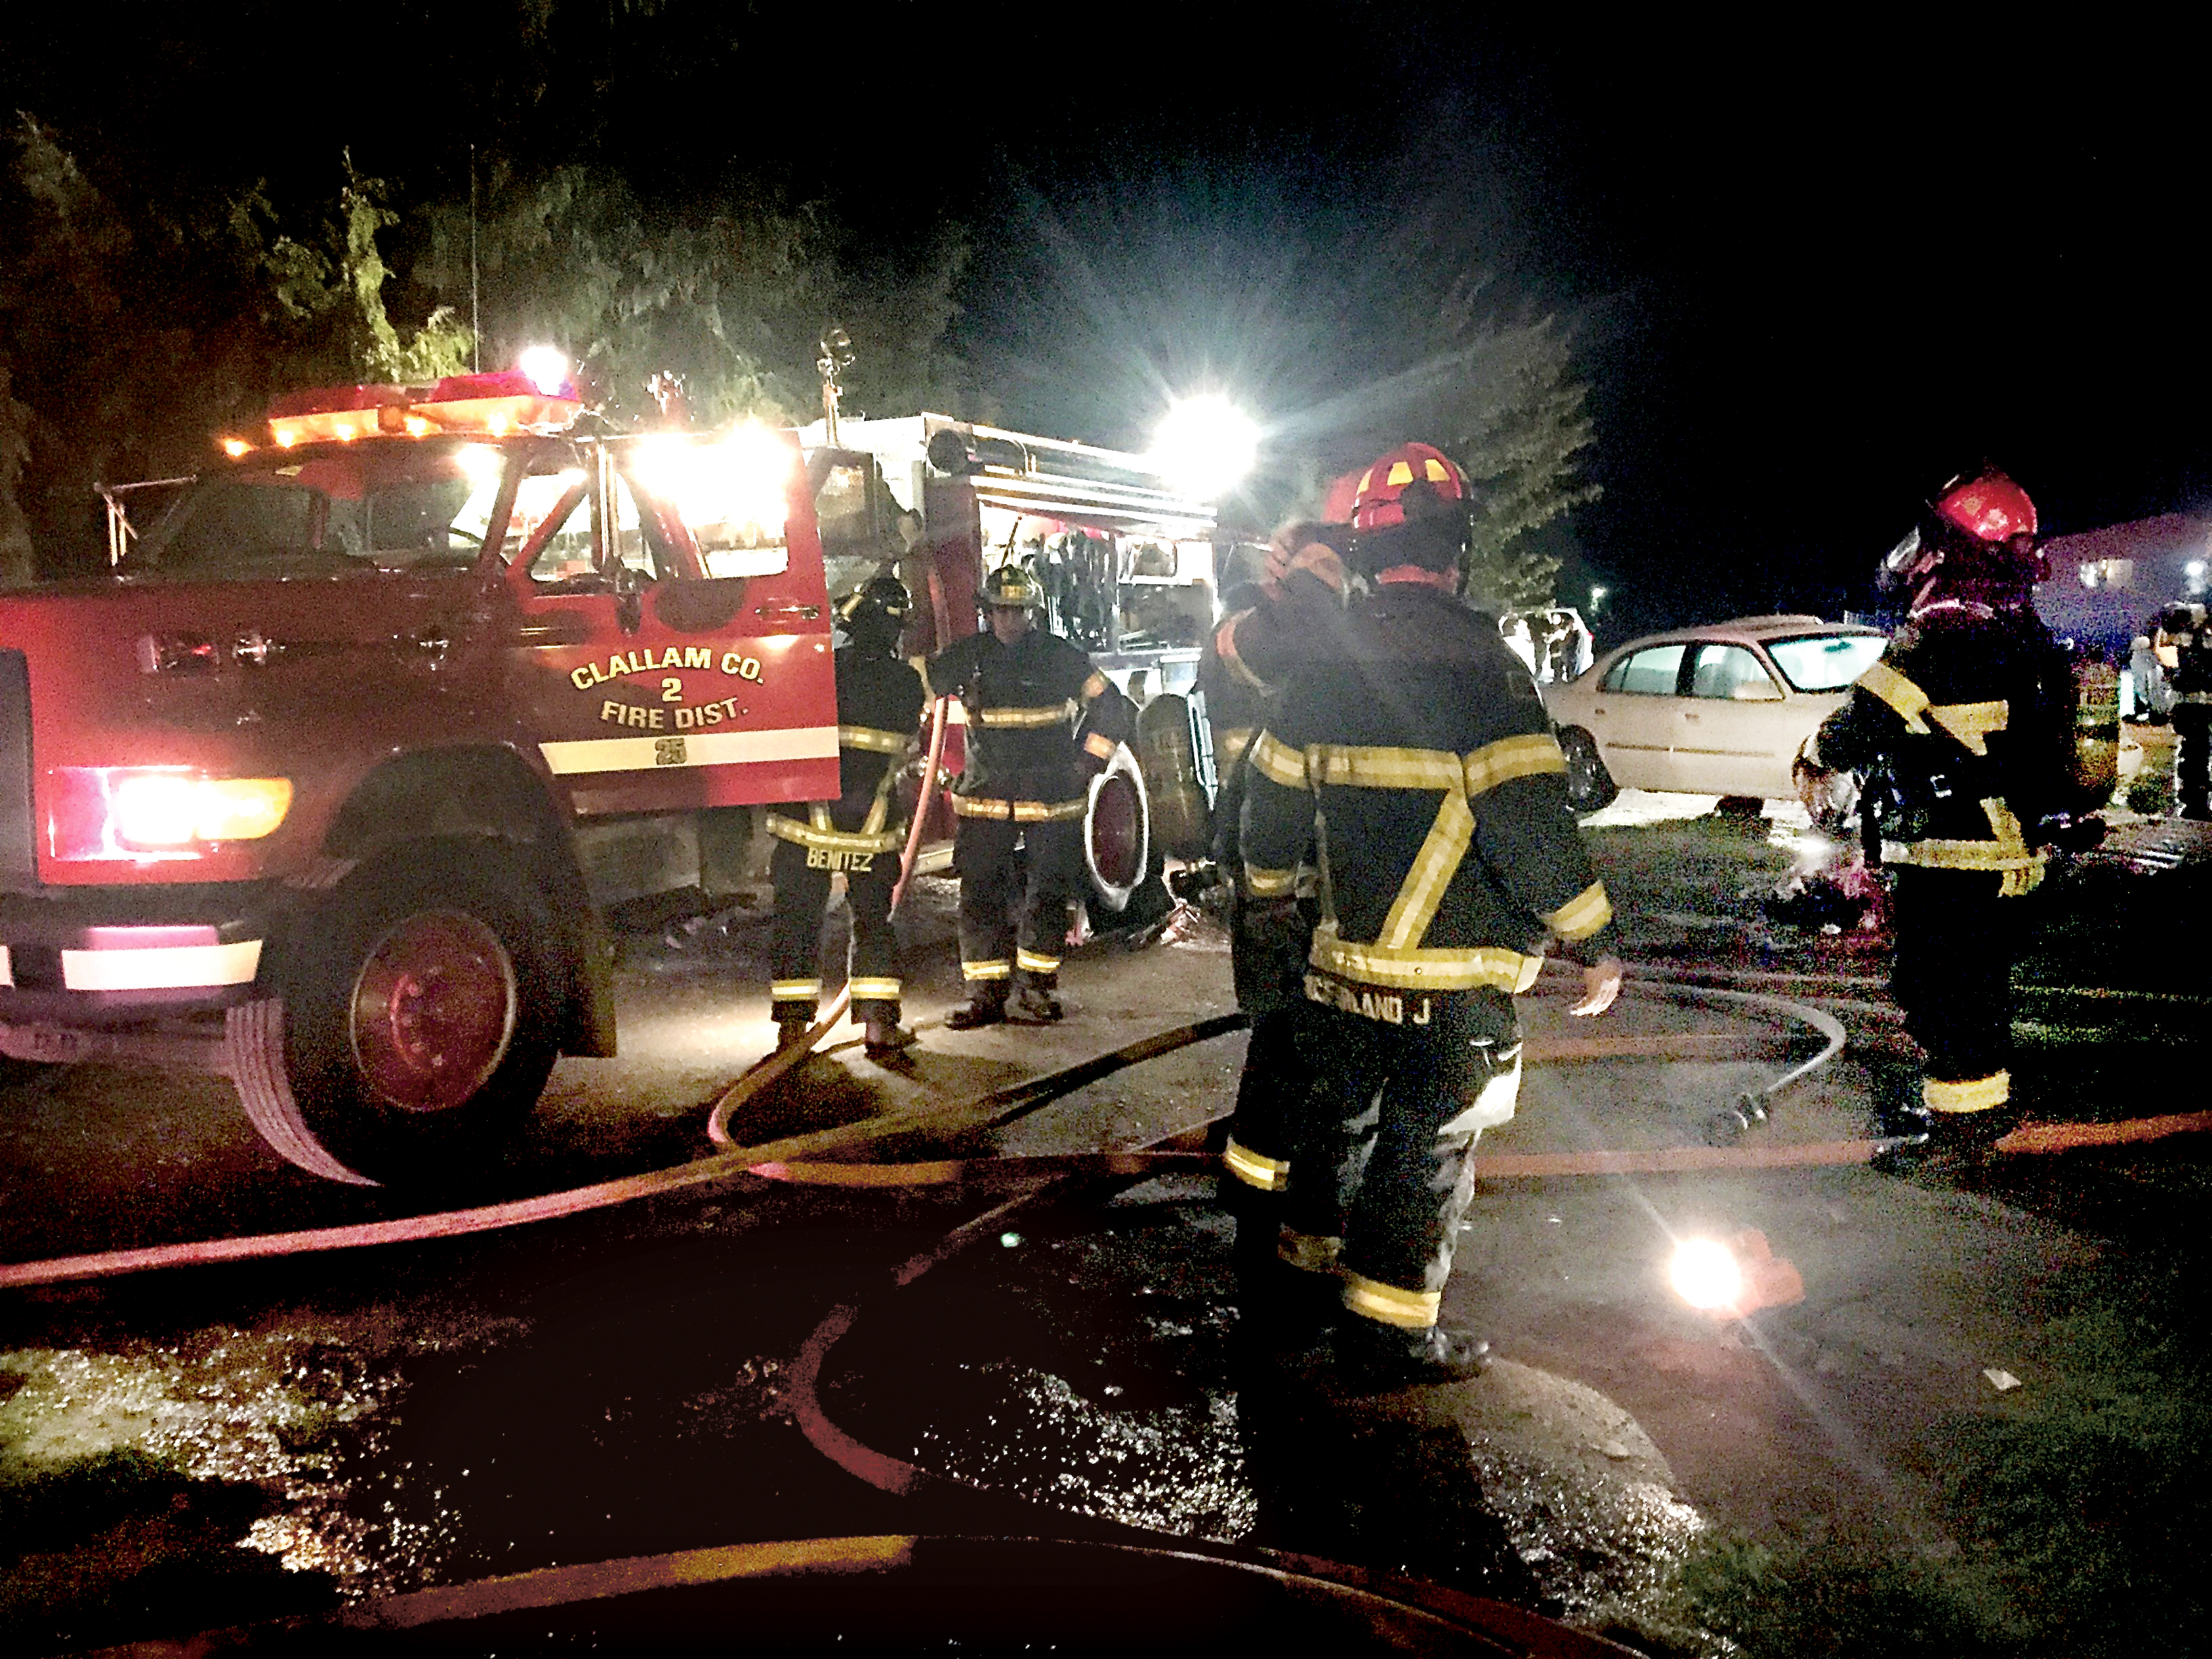 Clallam County Fire District No. 2 firefighters extinguish a fire on Ennis Creek Road that started Monday night. — Sam Phillips/Clallam County Fire District No. 2